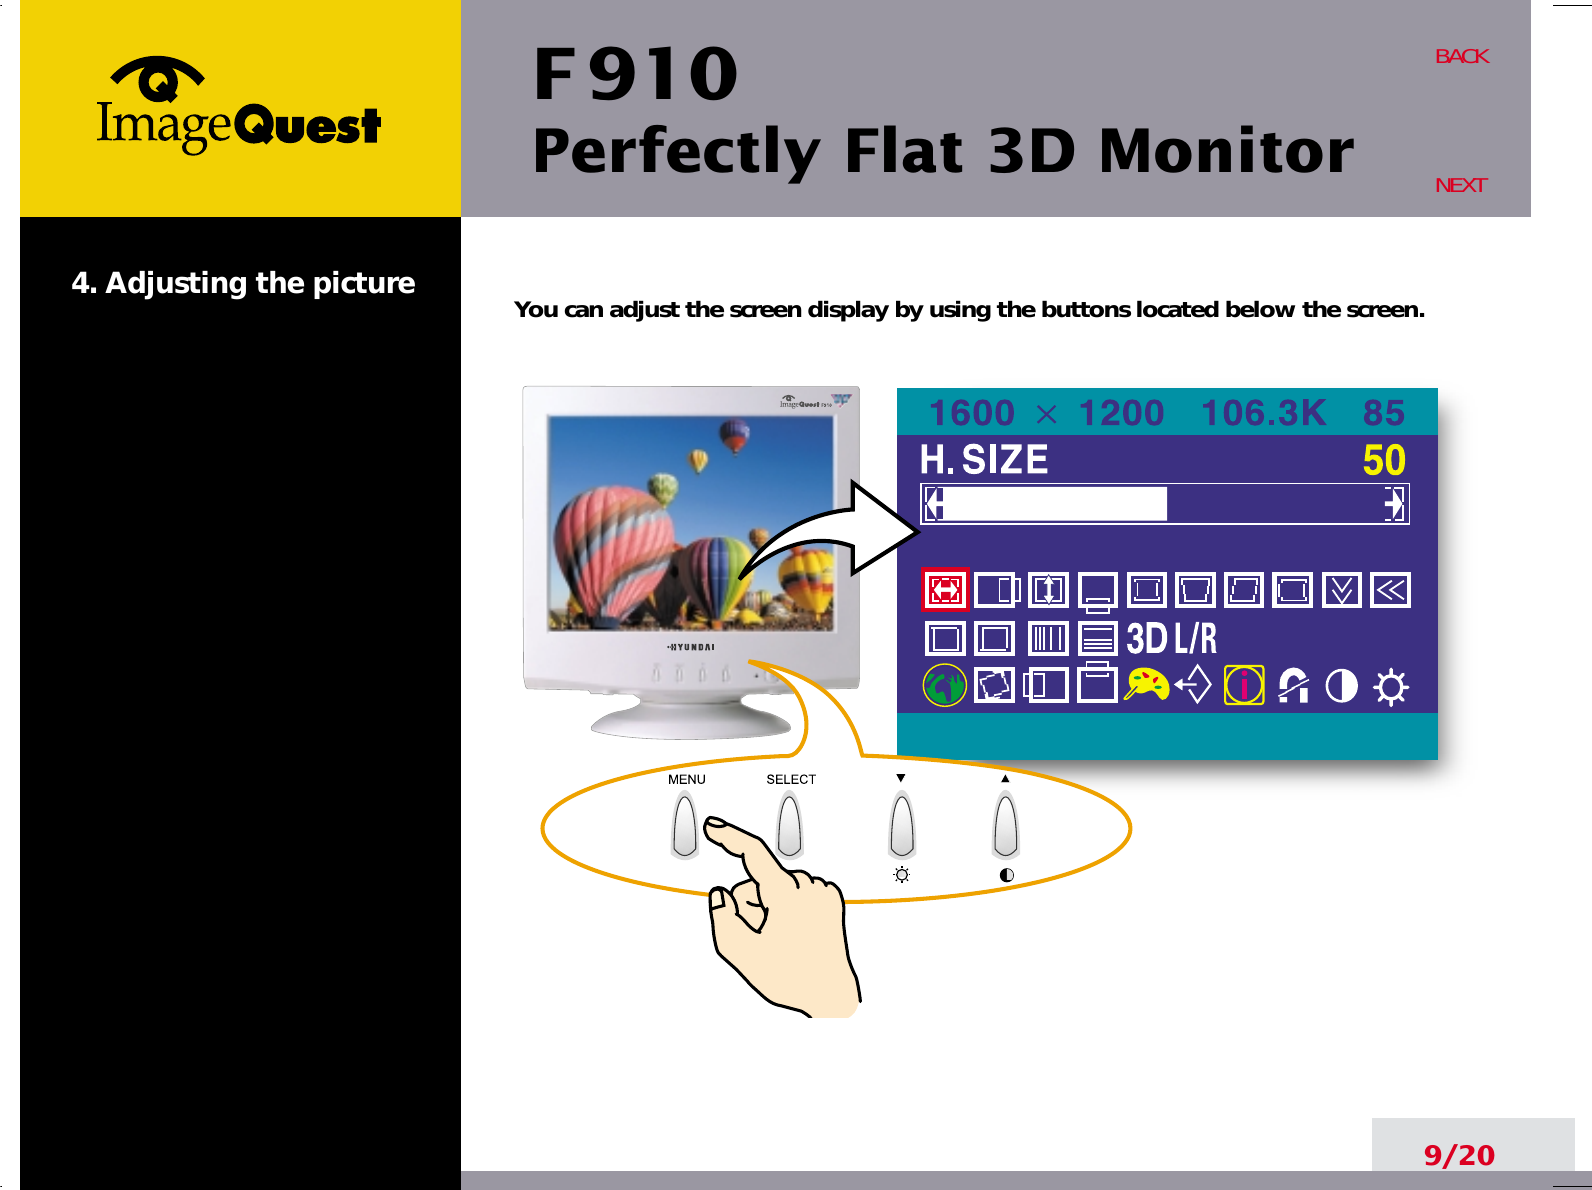 F 910Perfectly Flat 3D Monitor9/20BACKNEXT4. Adjusting the picture You can adjust the screen display by using the buttons located below the screen.